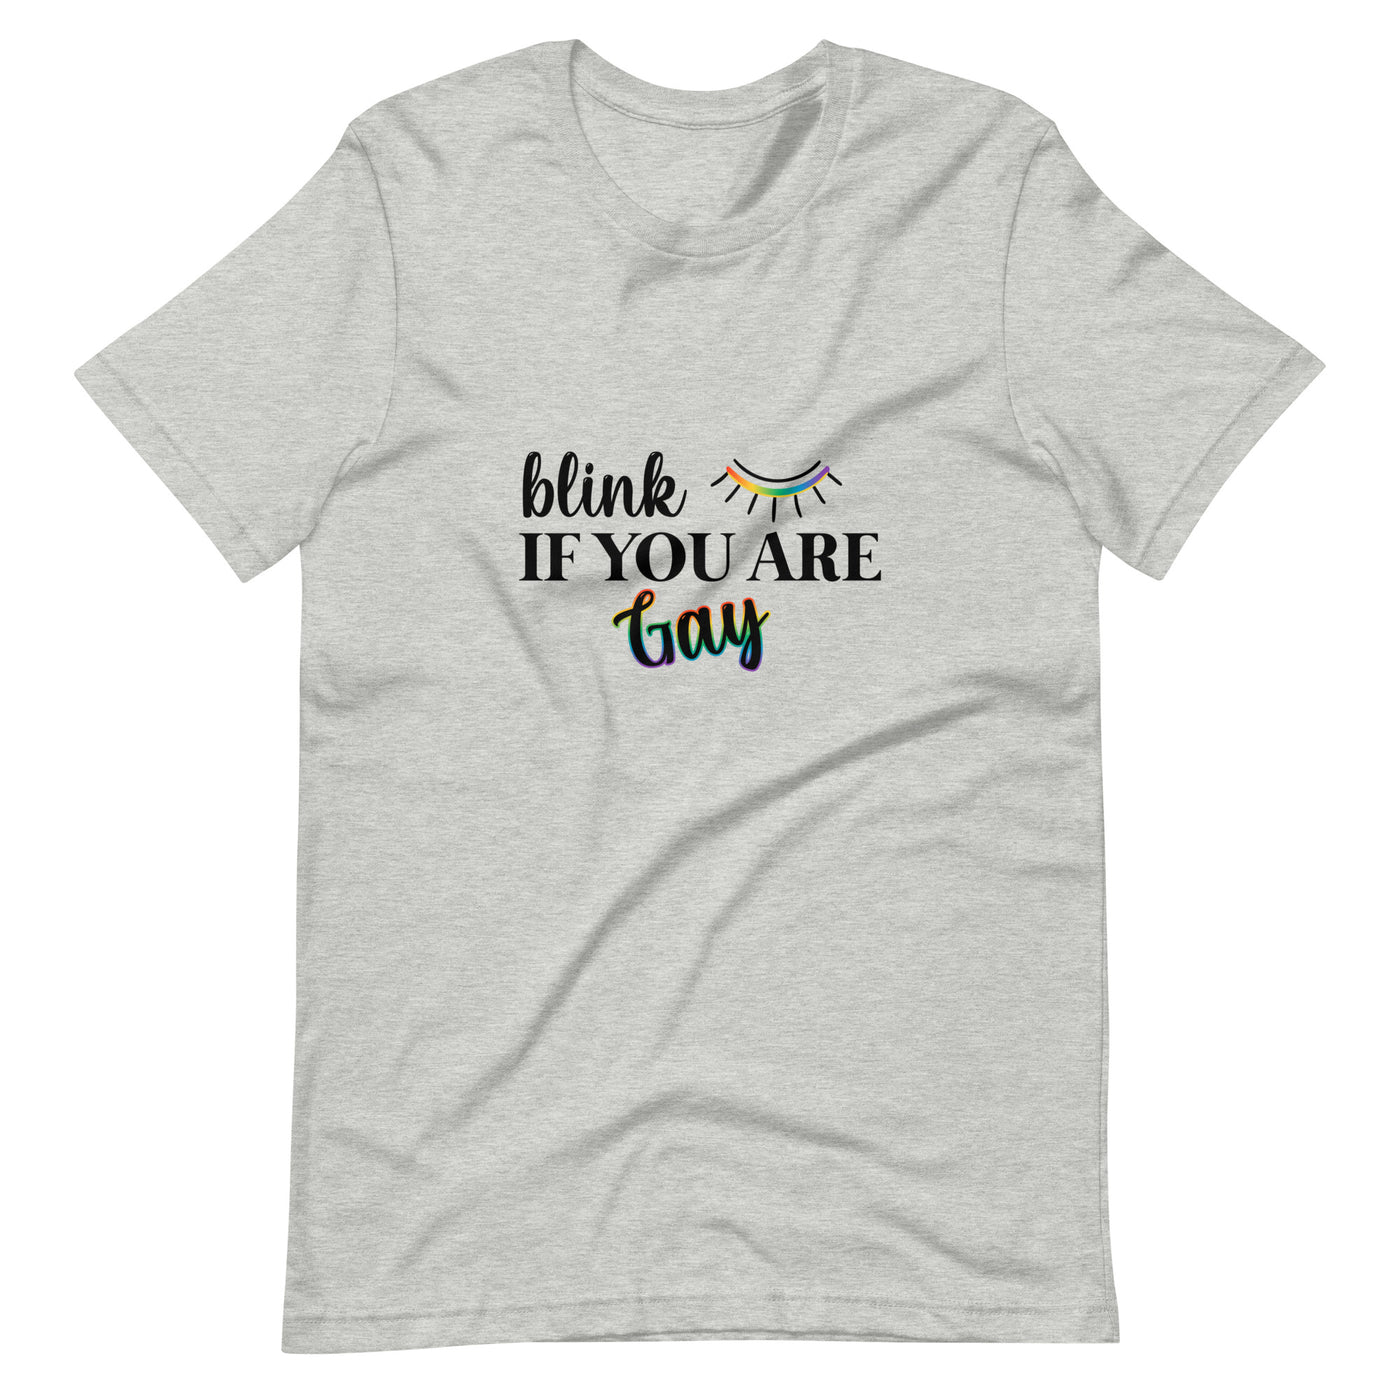 Pride Clothes - Slay Everyday Blink If You Are Gay Pride Tops TShirt - Athletic Heather